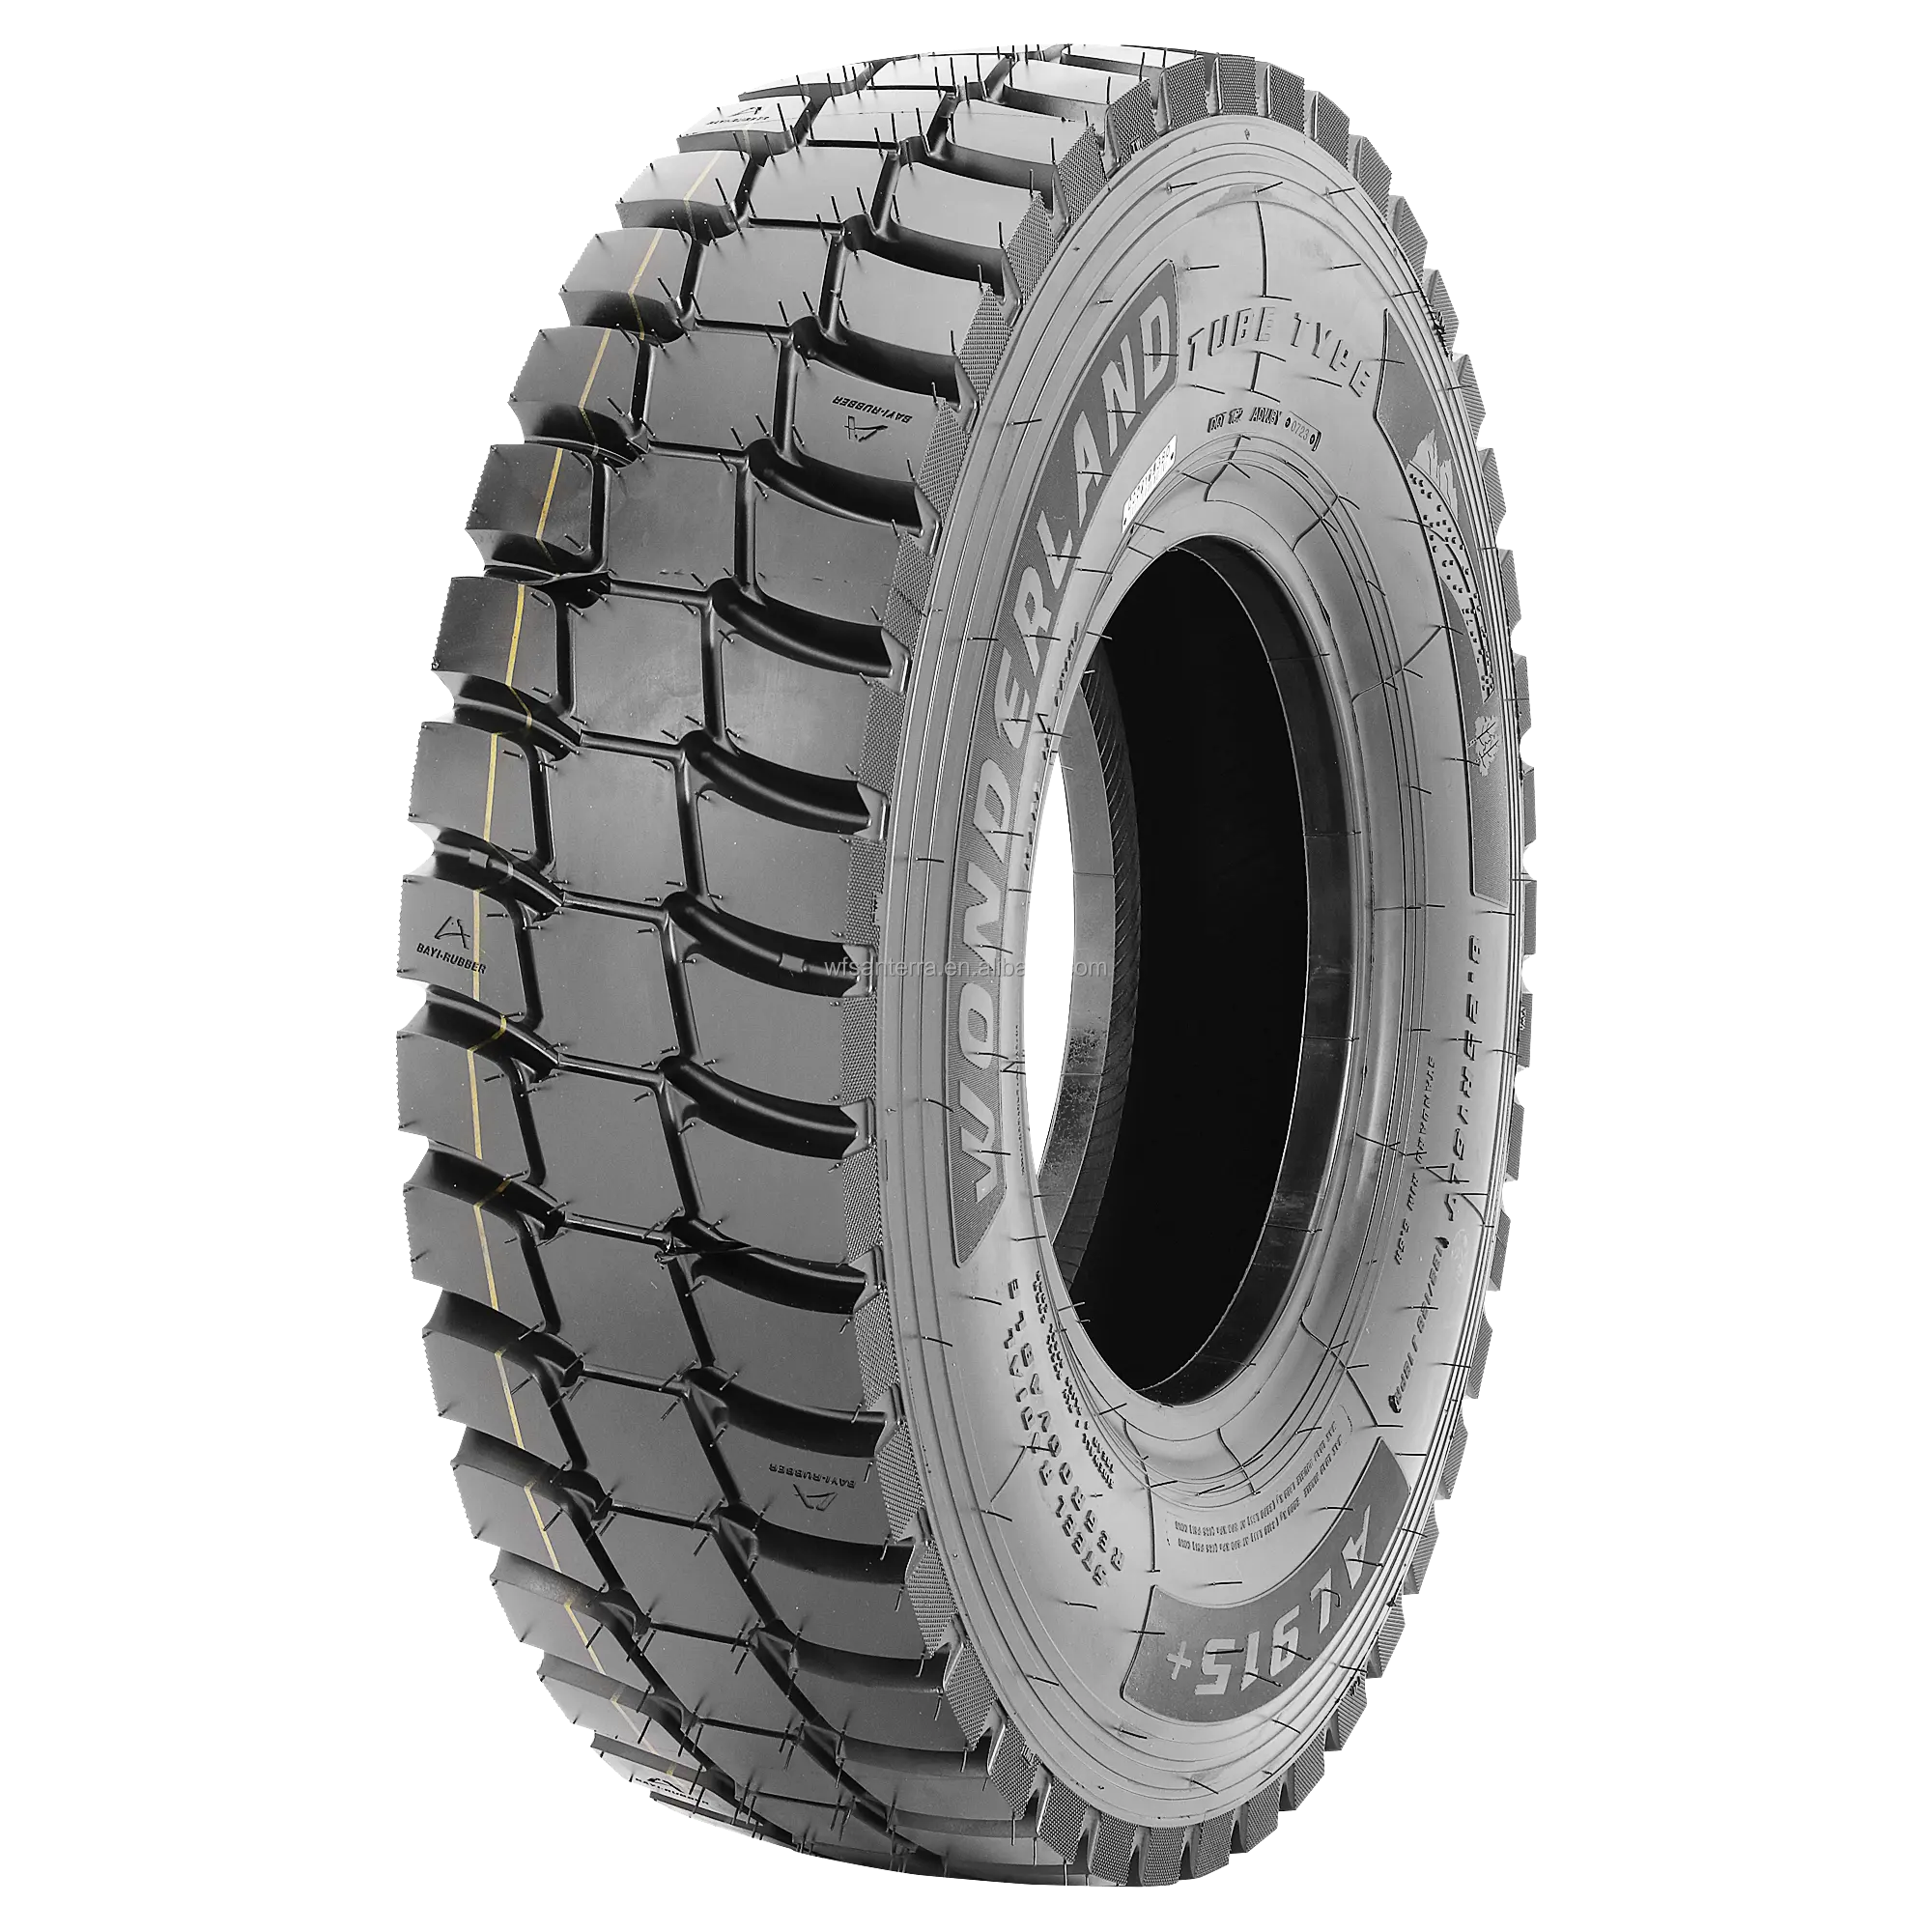 New Design 1000.20 Tires 11r22.5 Factory Tire Truck Tire 1100r20 For Vehicles